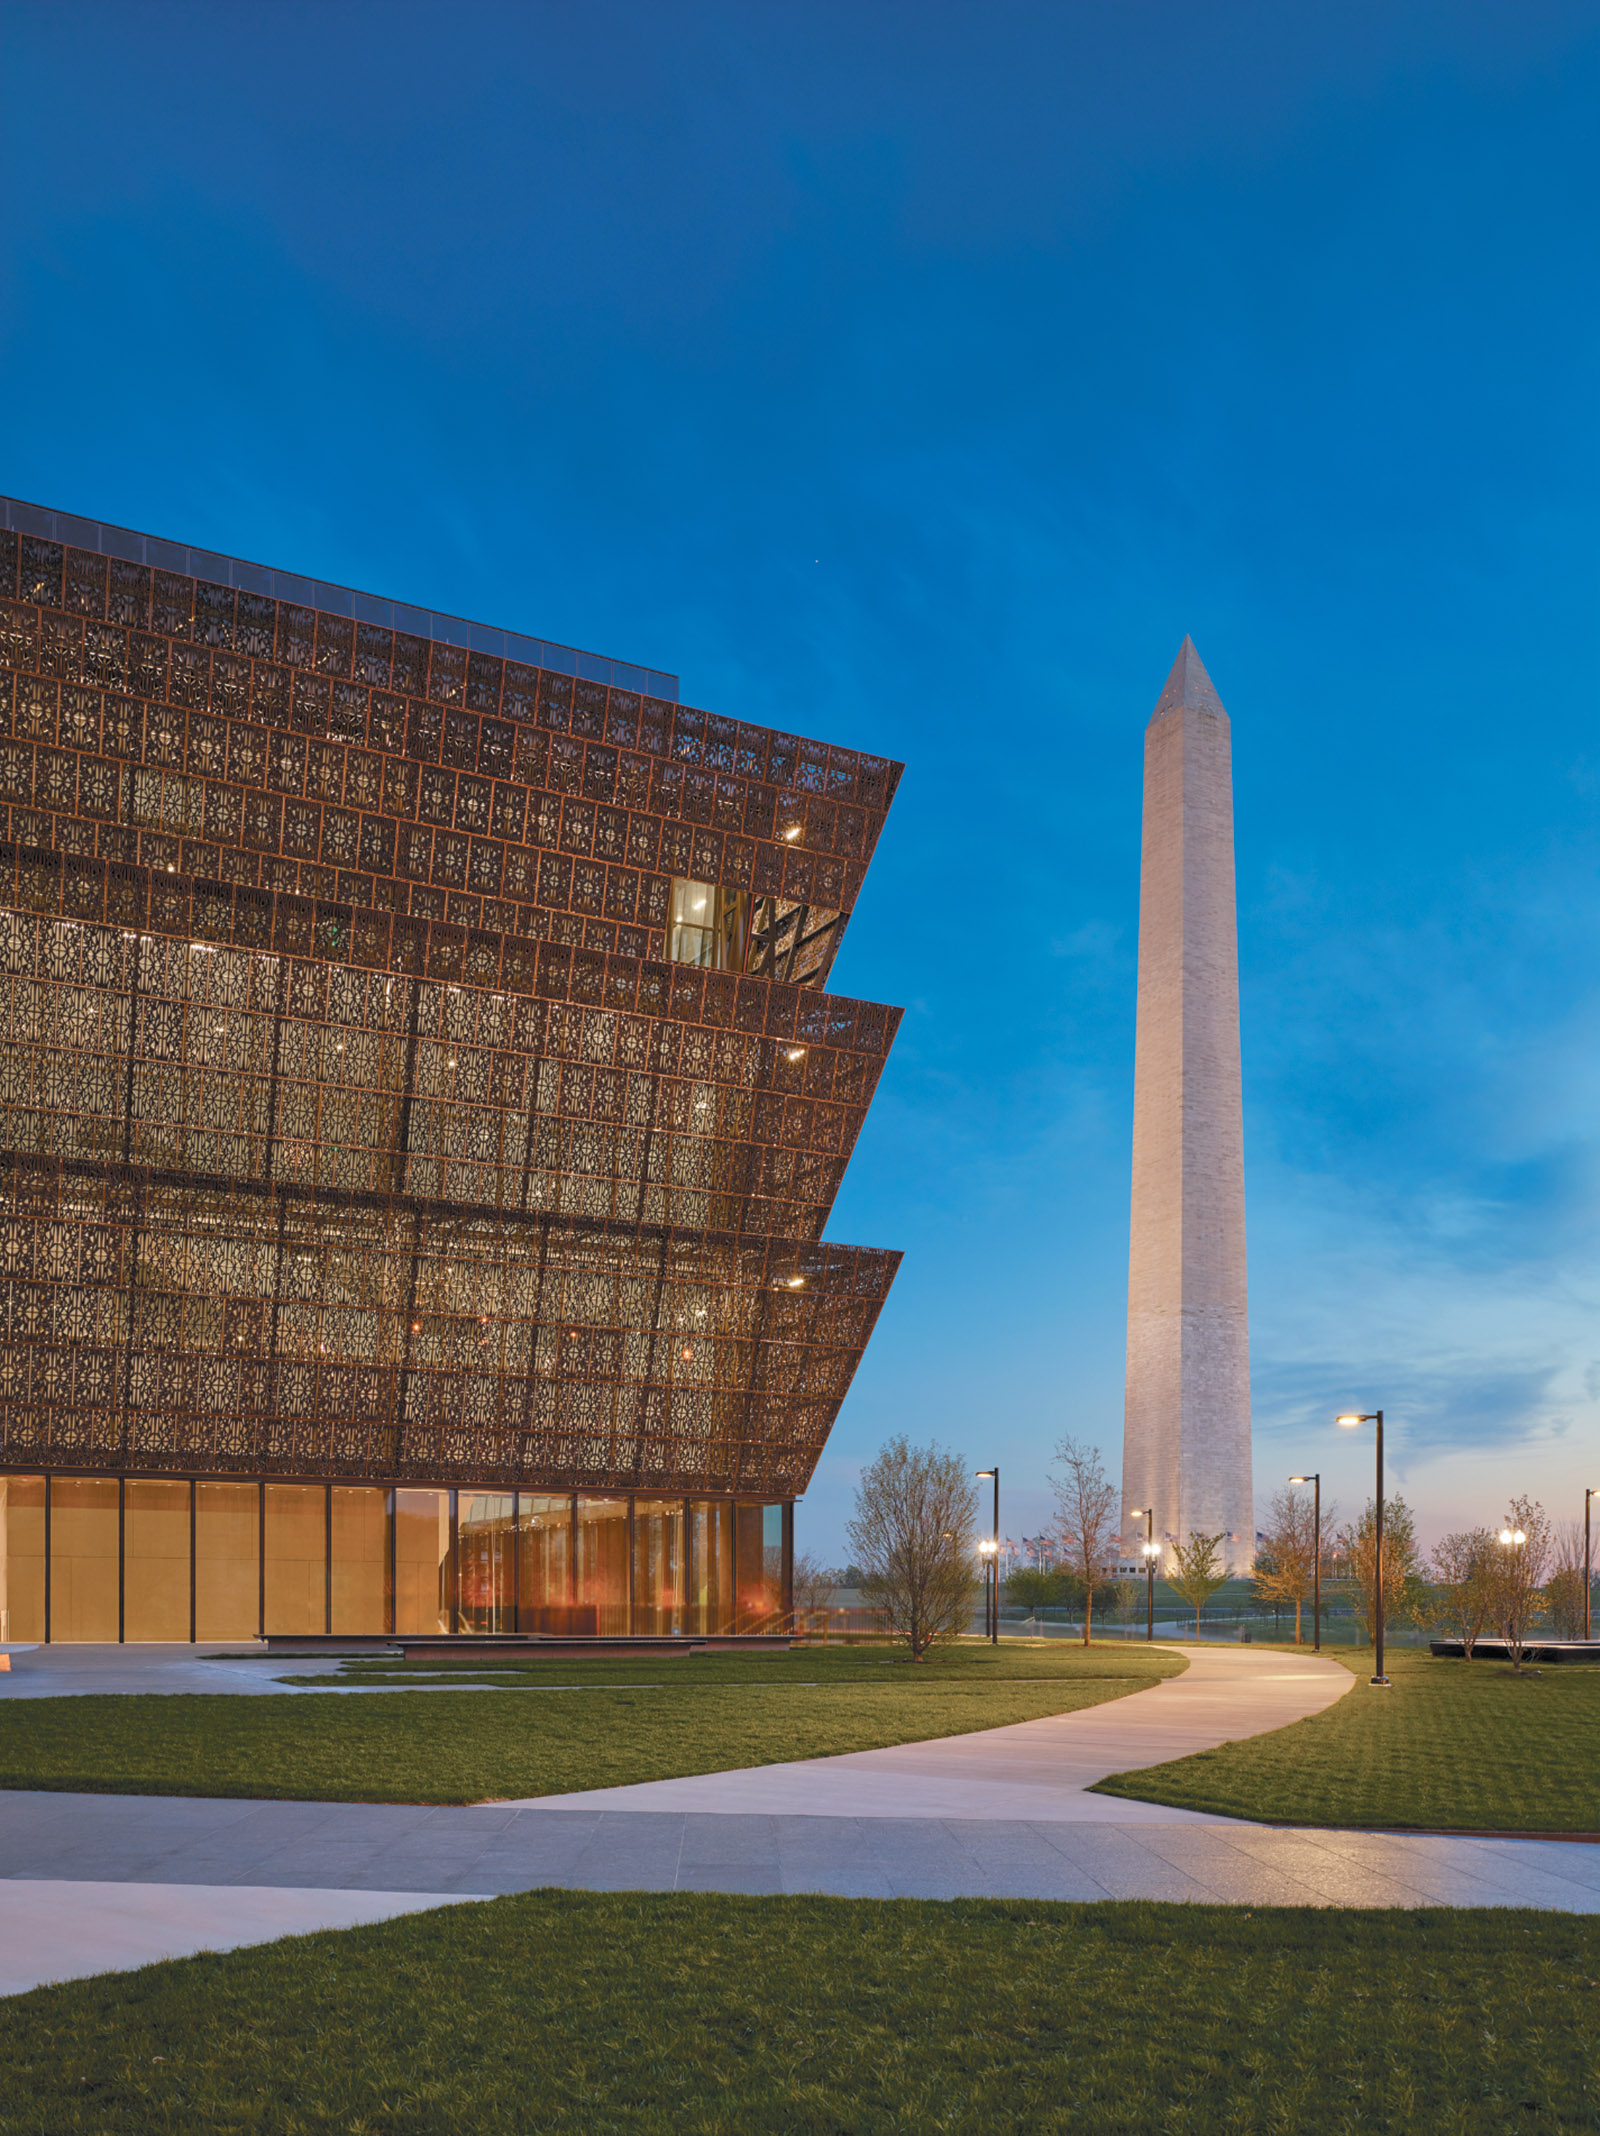 The Smithsonian’s National Museum of African American History and Culture, which opened on the National Mall in Washington, D.C., in September 2016